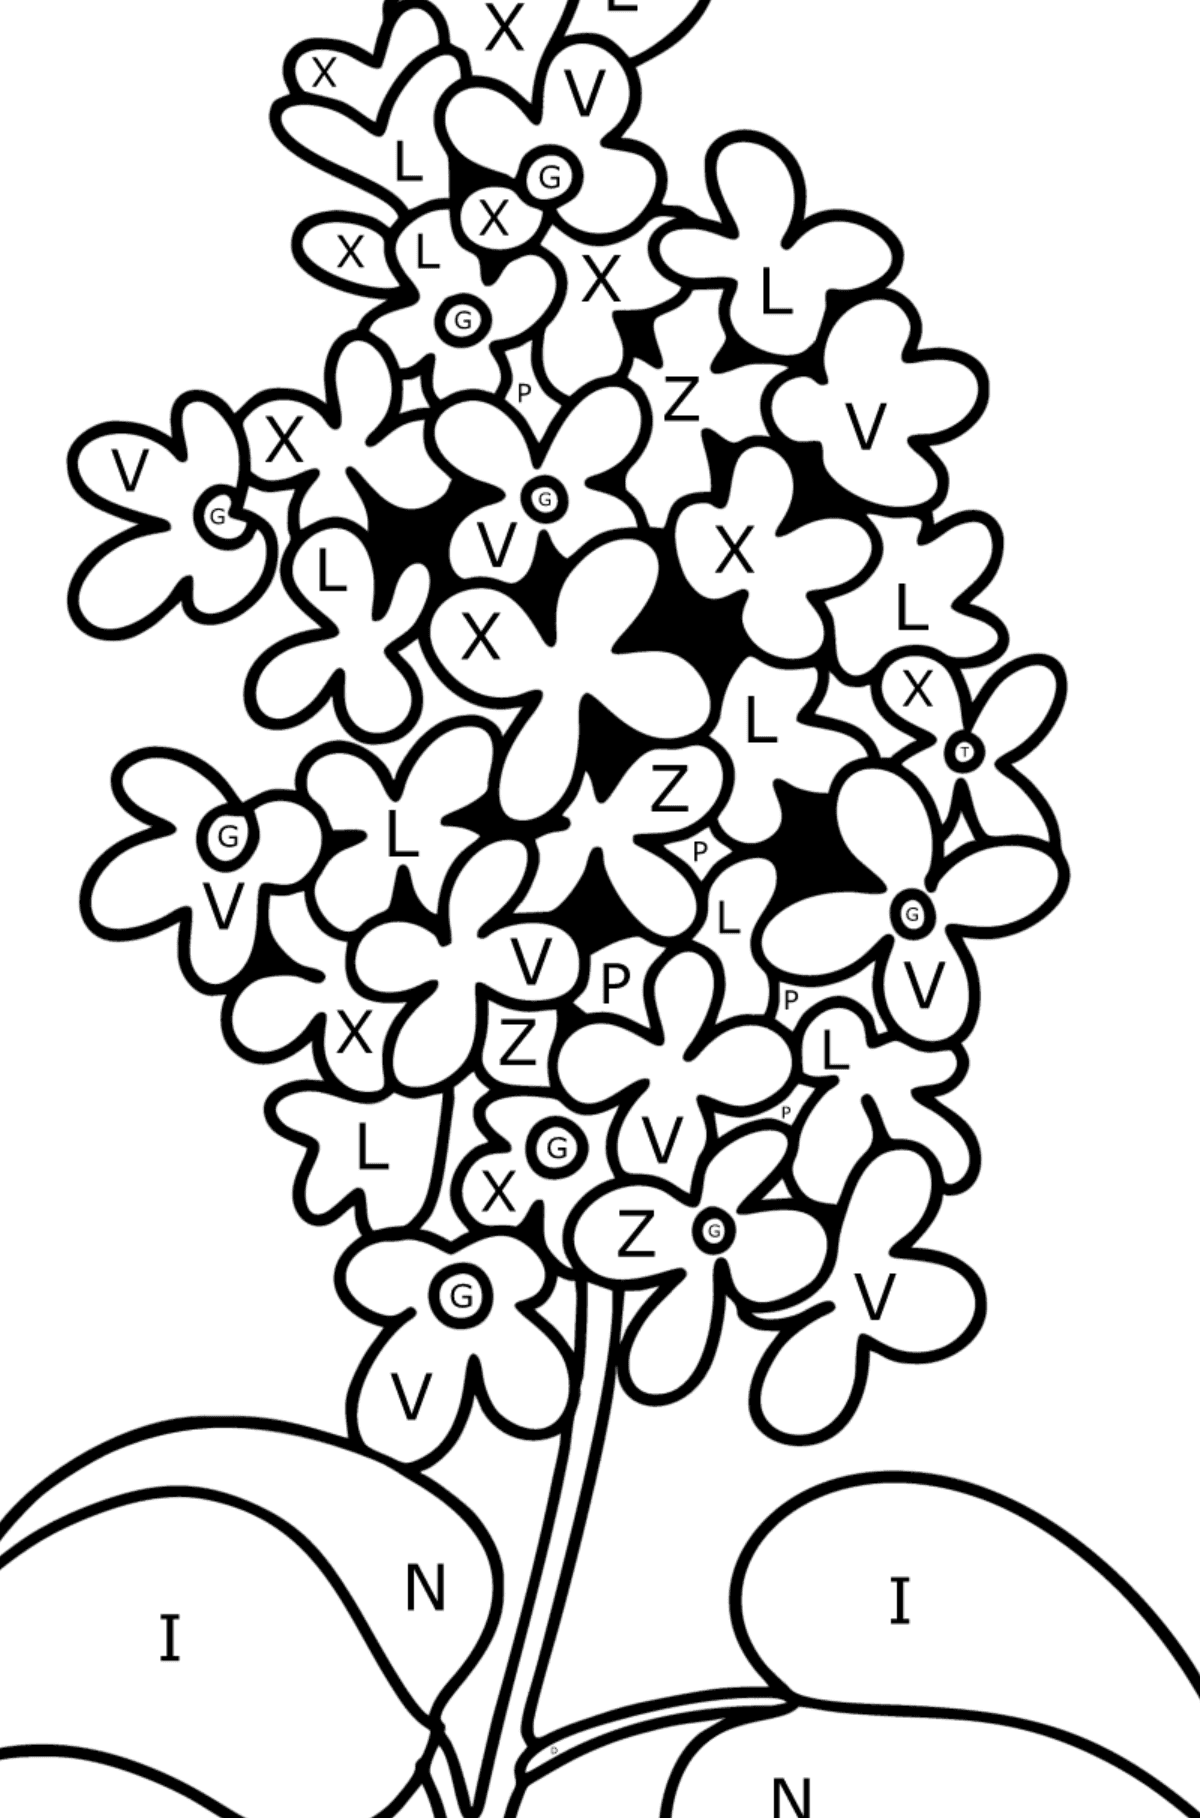 Lilac sprig coloring page - Coloring by Letters for Kids